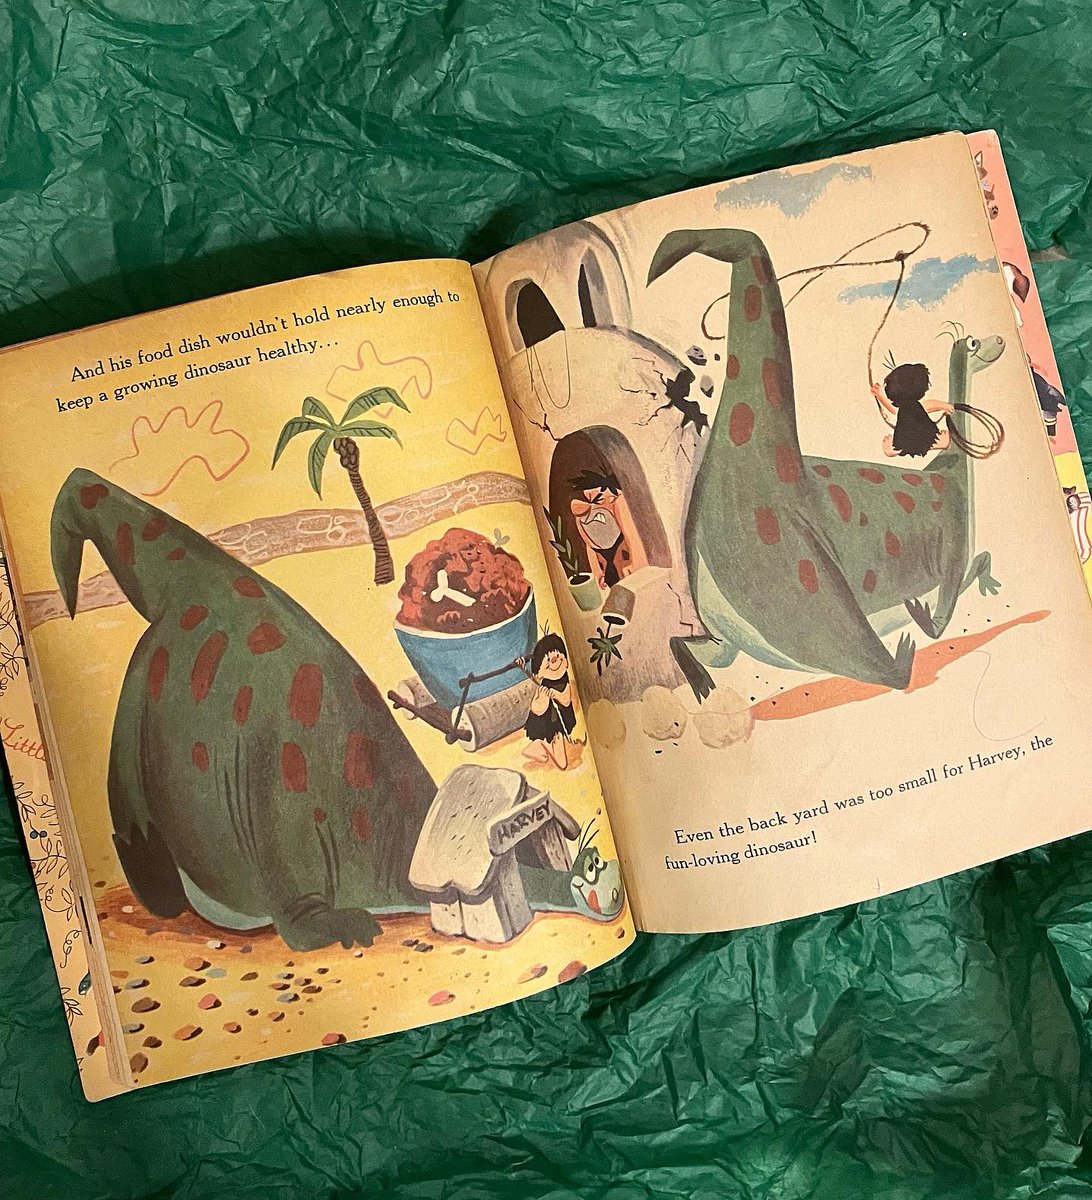 My aunt found me a copy of this classic #LittleGoldenBook from #TheFlintstones !
The cover is in rough condition, but the book itself is really nice!  It seems Harvey the pet dinosaur ate Freddy Jr and the trauma causes Fred and Wilma to never speak of him again!
#HannaBarbera